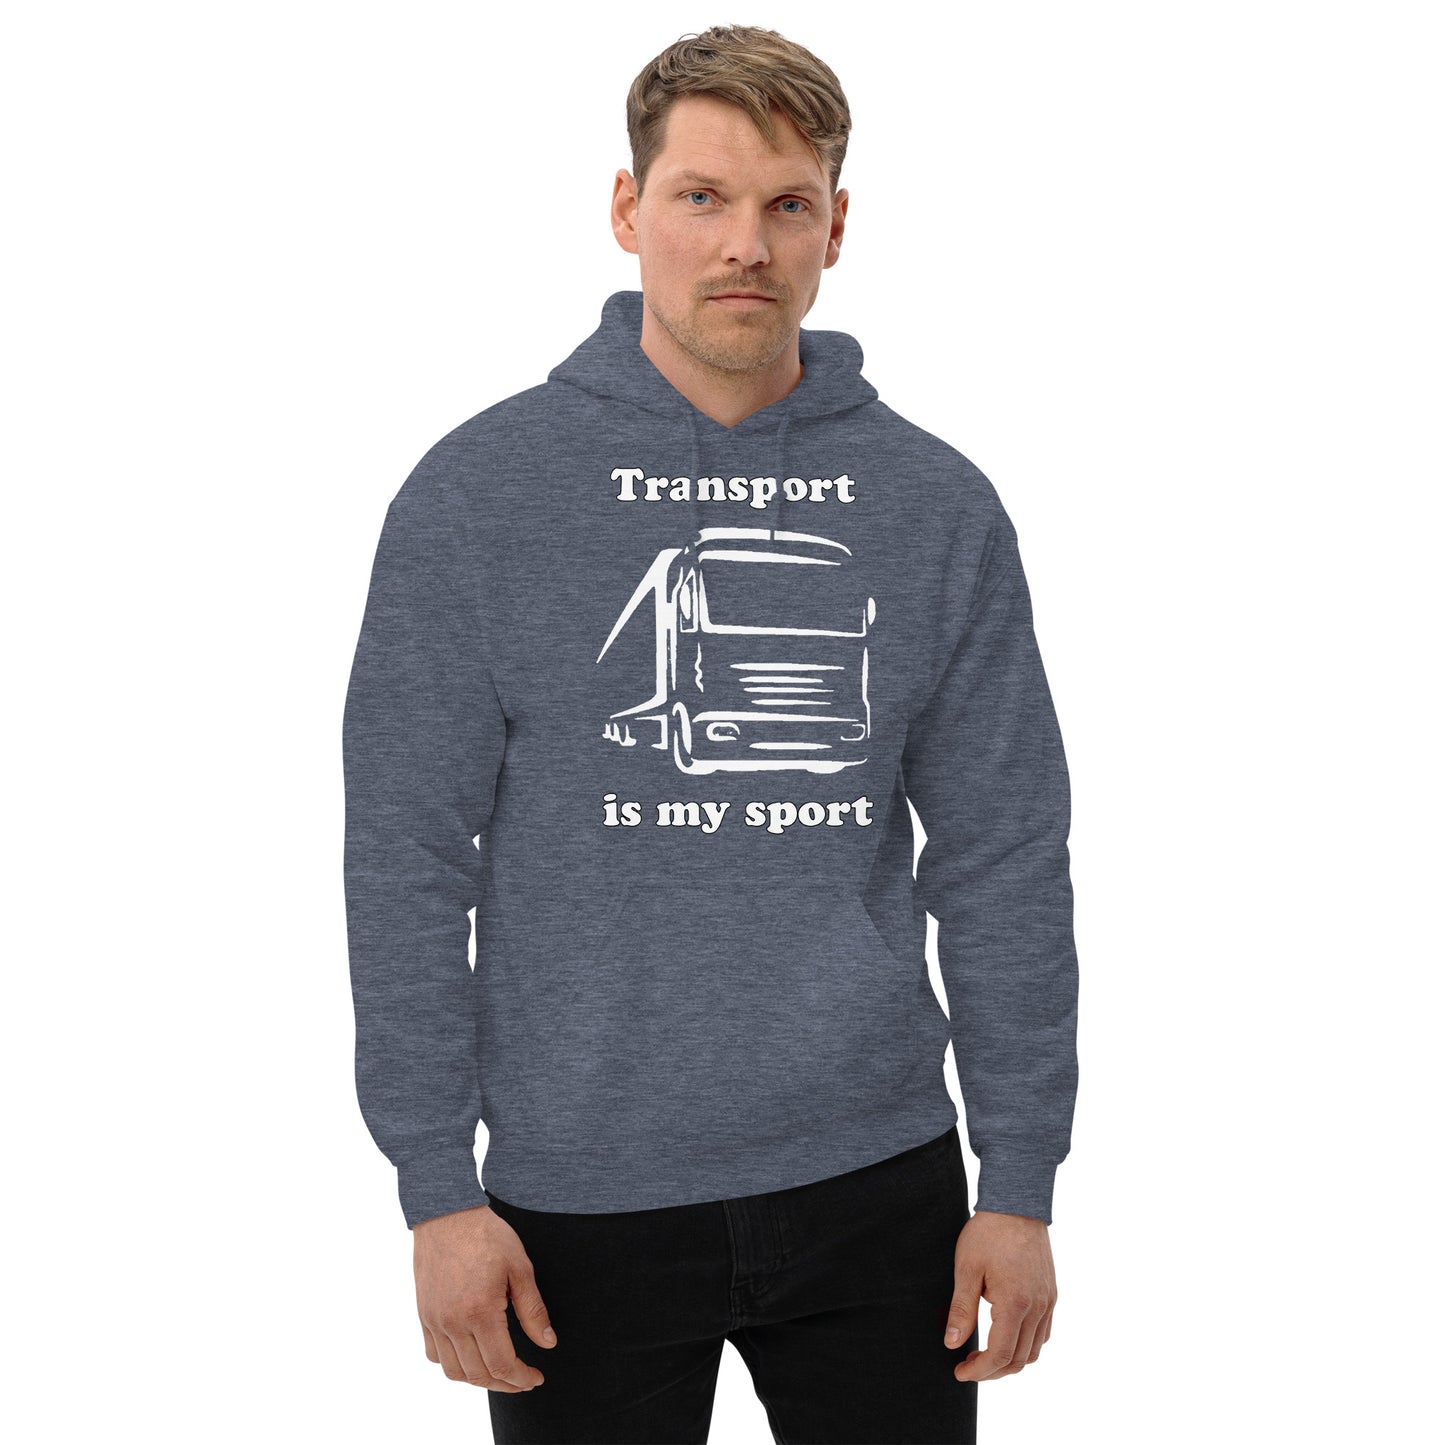 Man with dark navy blue hoodie with picture of truck and text "Transport is my sport"